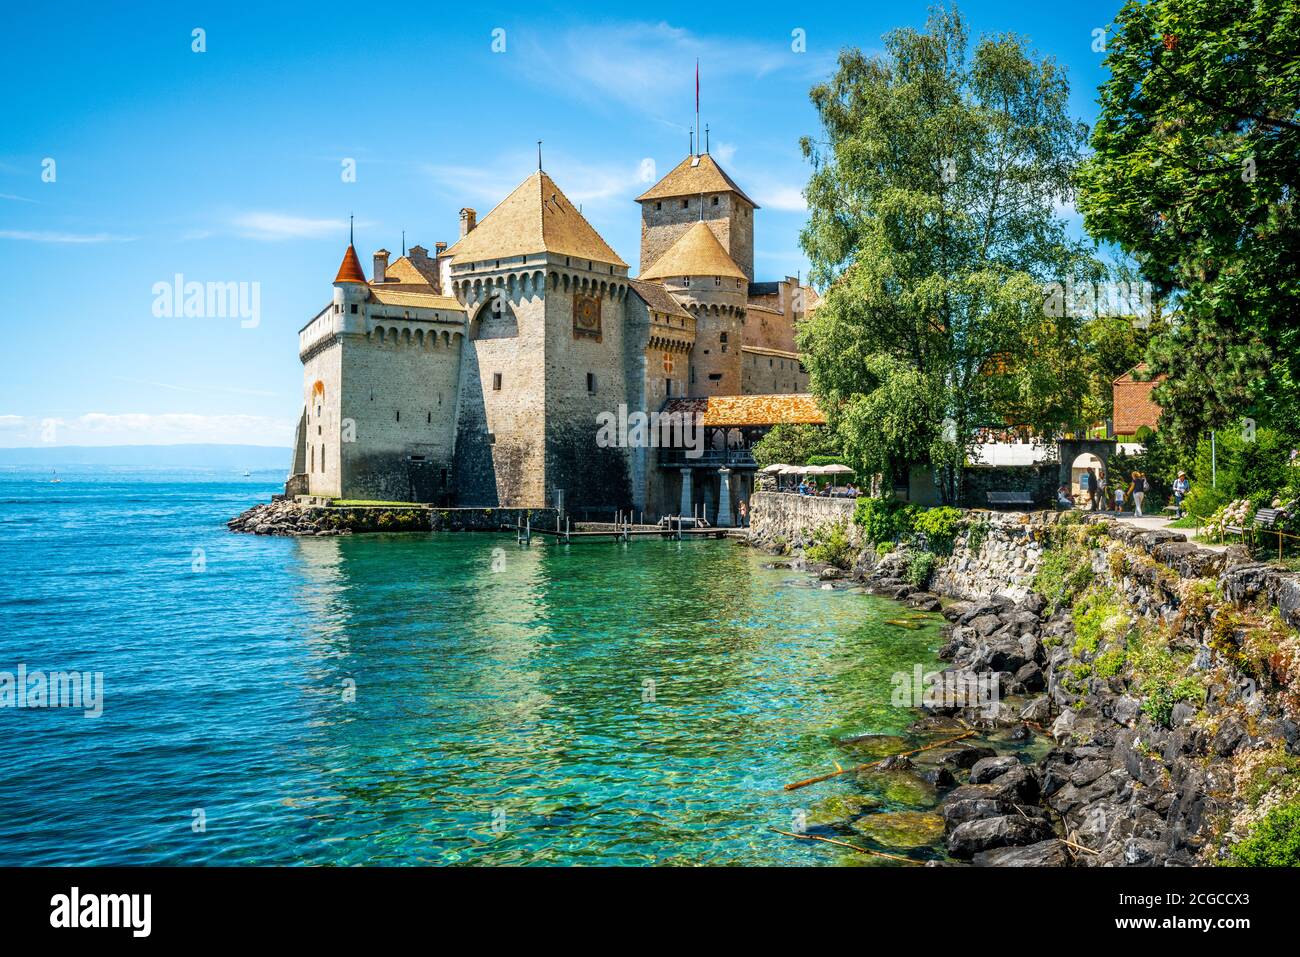 Chillon castle scenic view with colorful Lake Geneva water and entrance in Vaud Switzerland Stock Photo